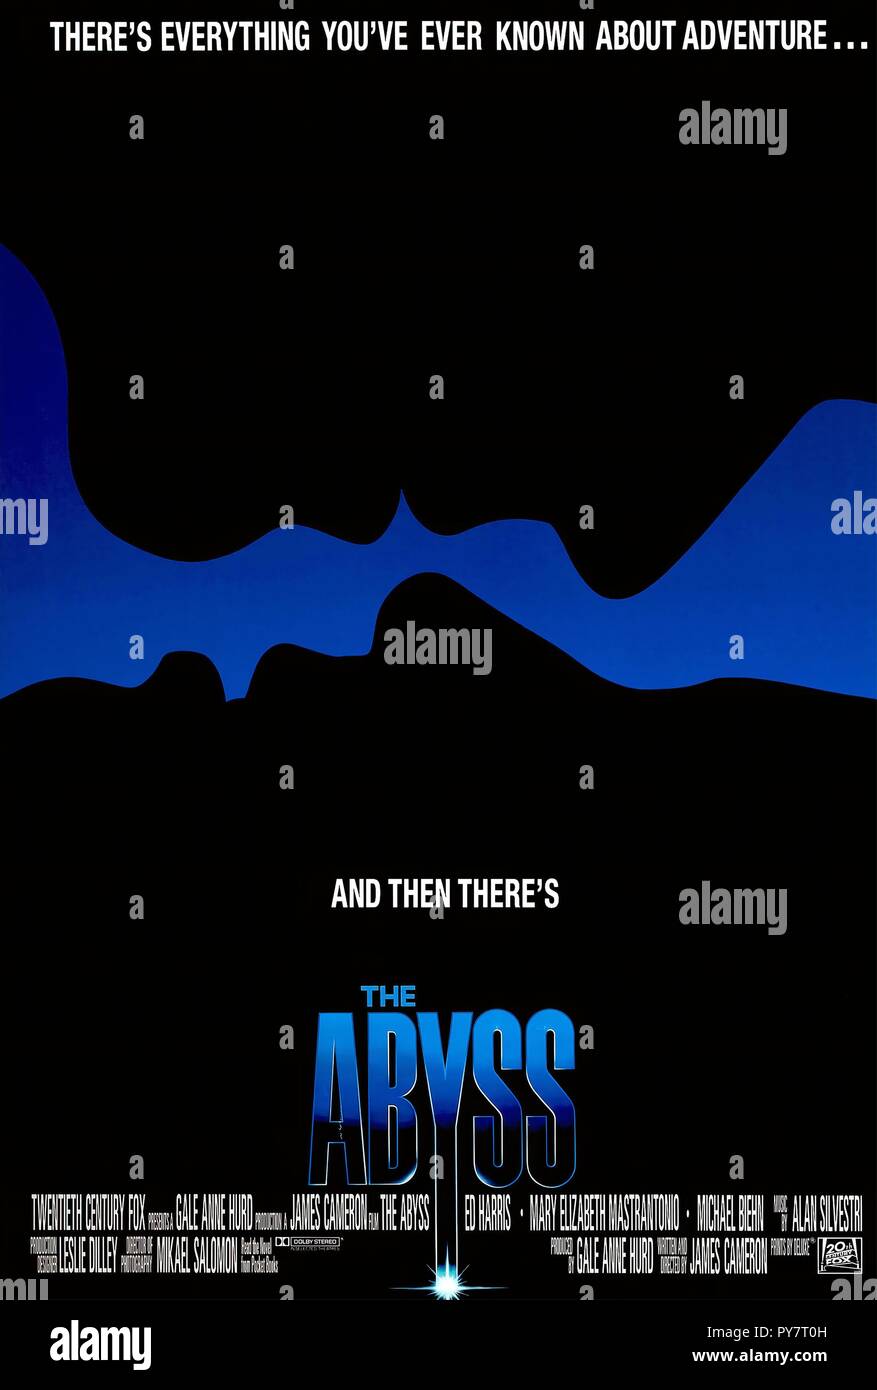 Original film title: THE ABYSS. English title: THE ABYSS. Year: 1989. Director: JAMES CAMERON. Credit: 20TH CENTURY FOX / Album Stock Photo